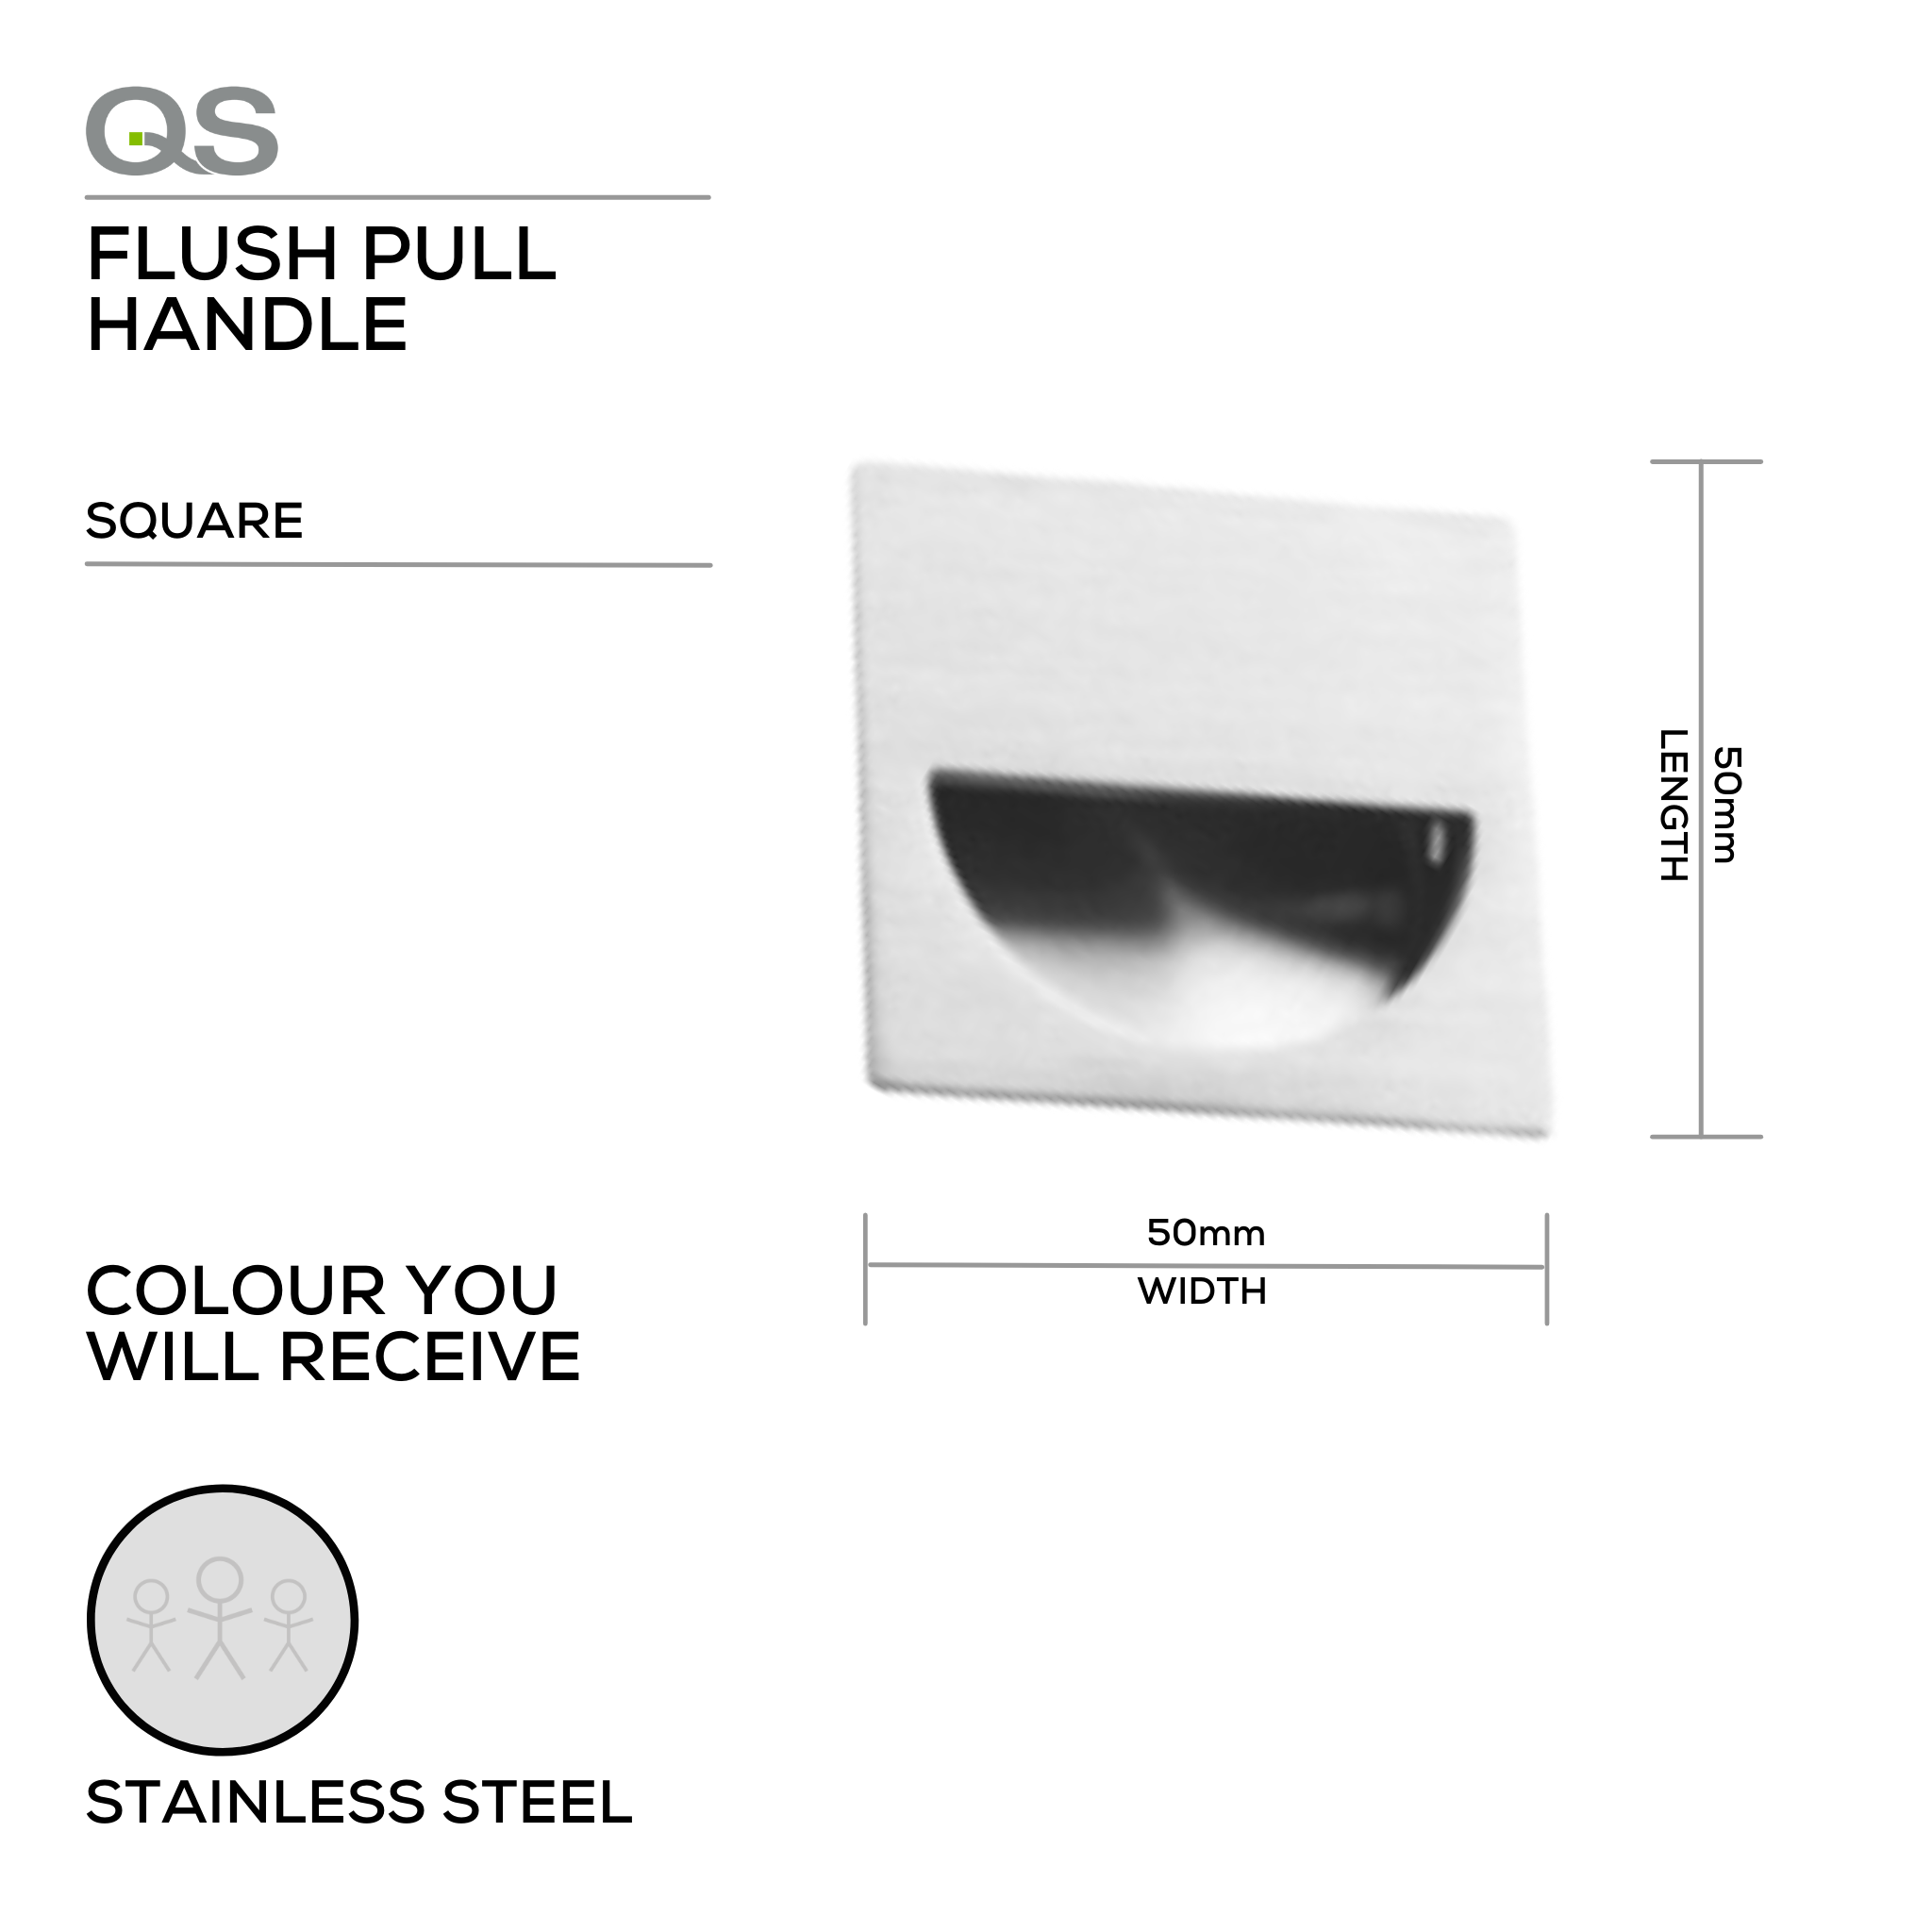 QS4455/1, Flush Pull, Square, 50mm (l) x 50mm (w), Stainless Steel, QS